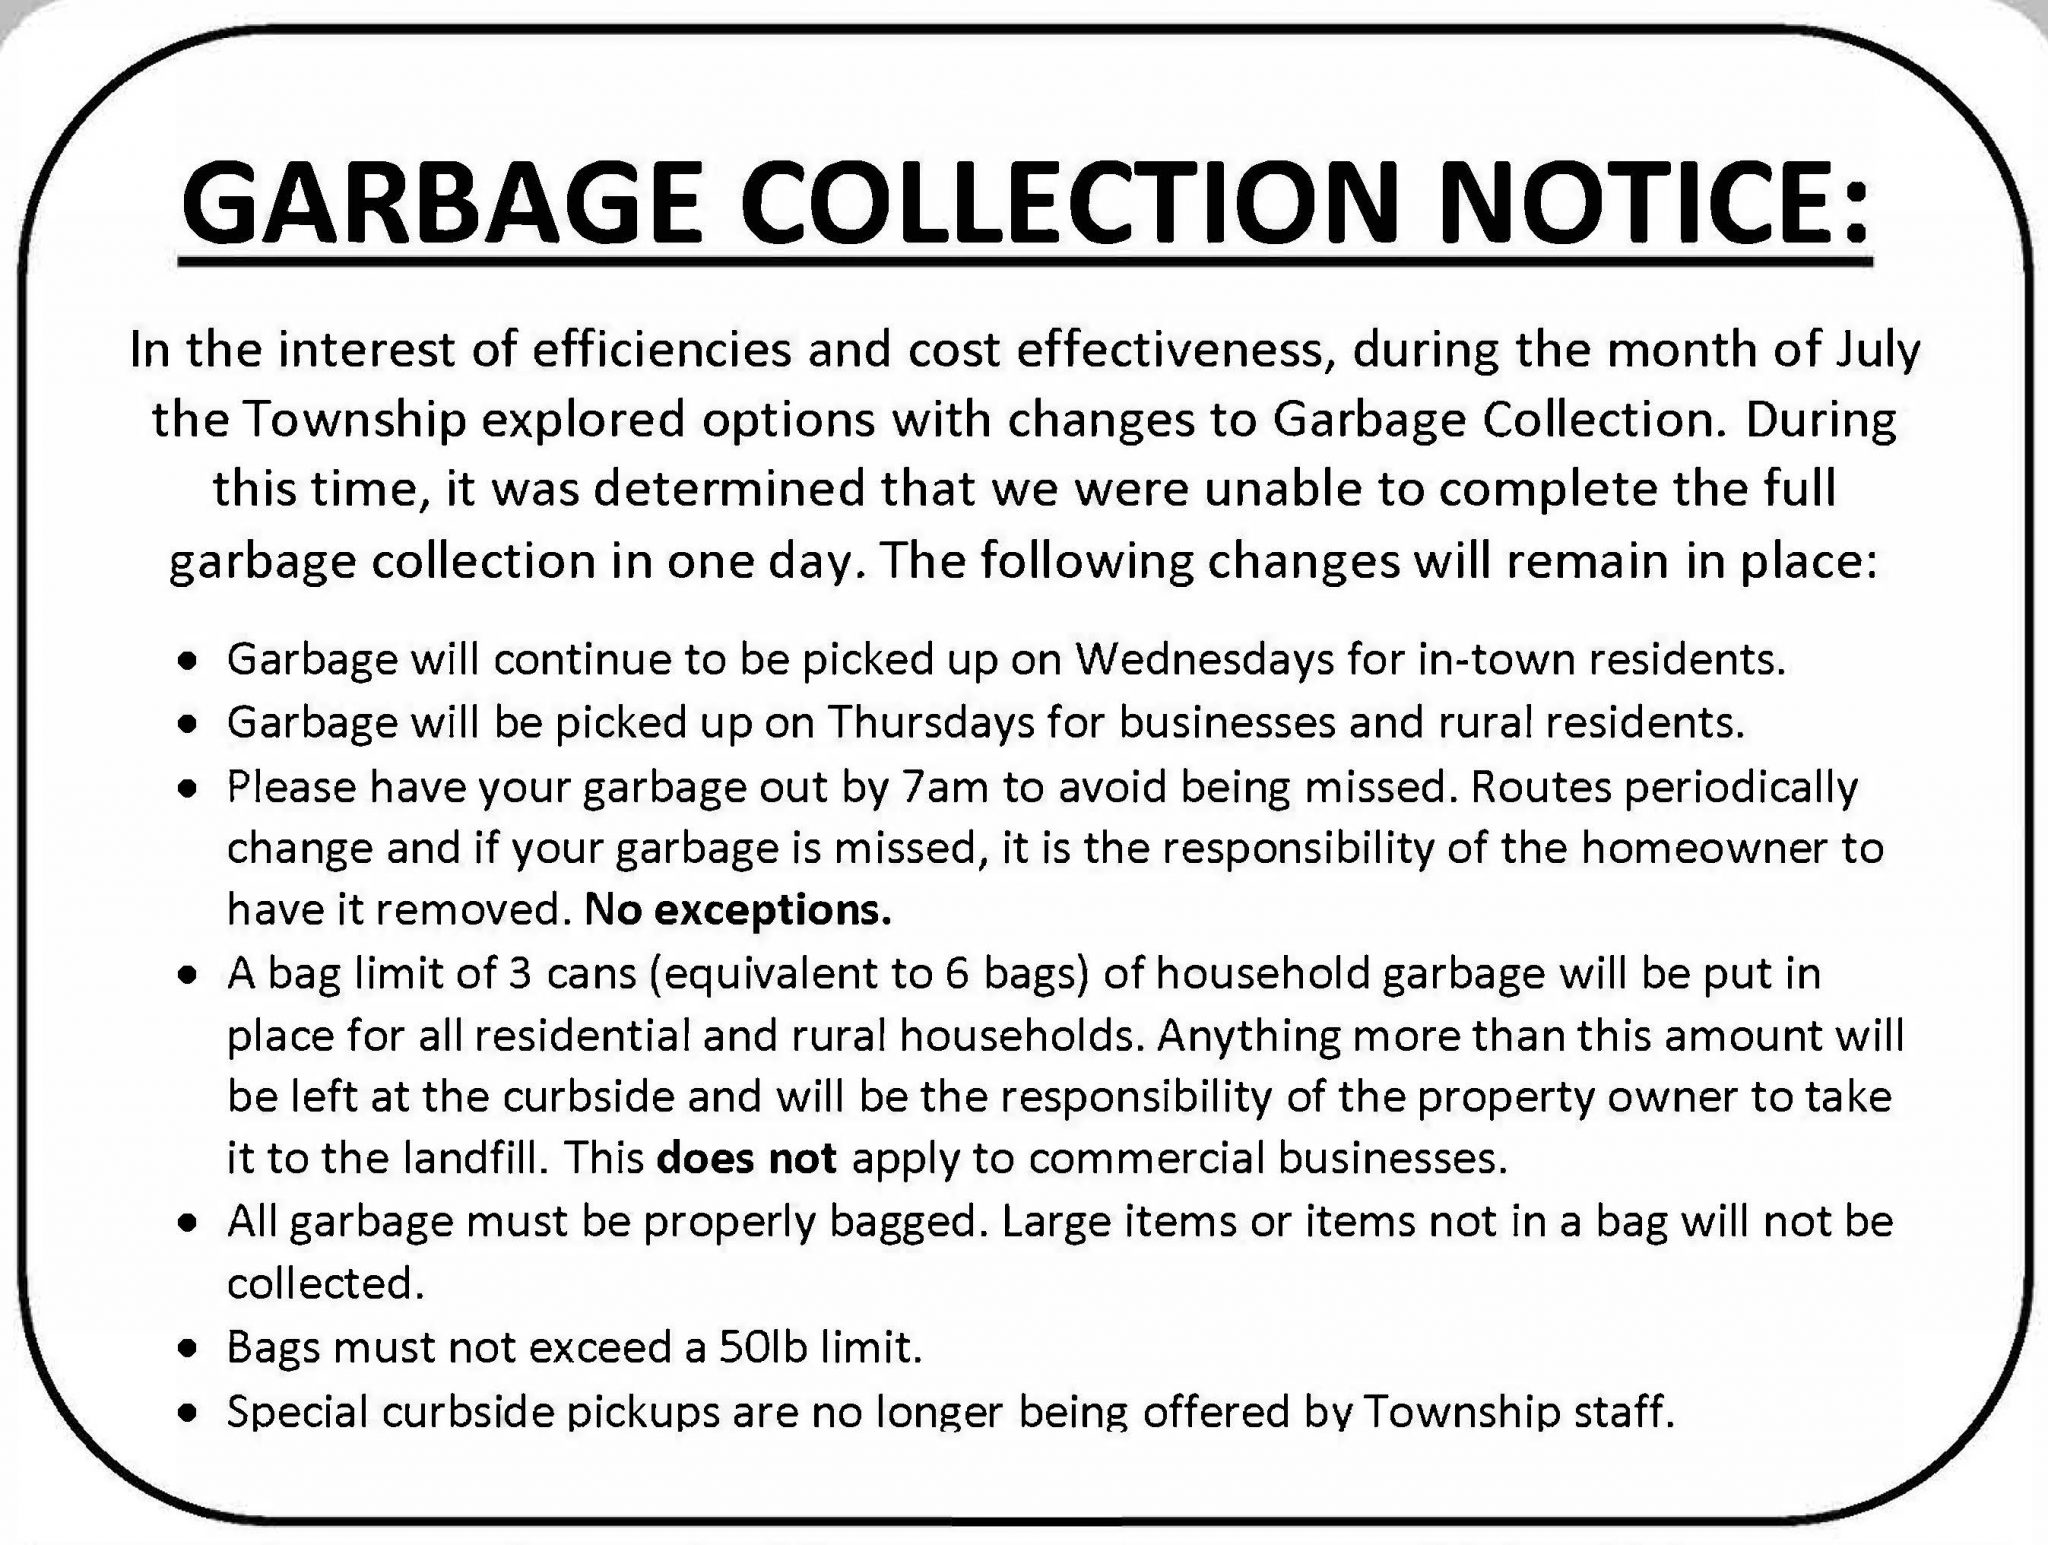 Garbage Collection Update Red Rock Township